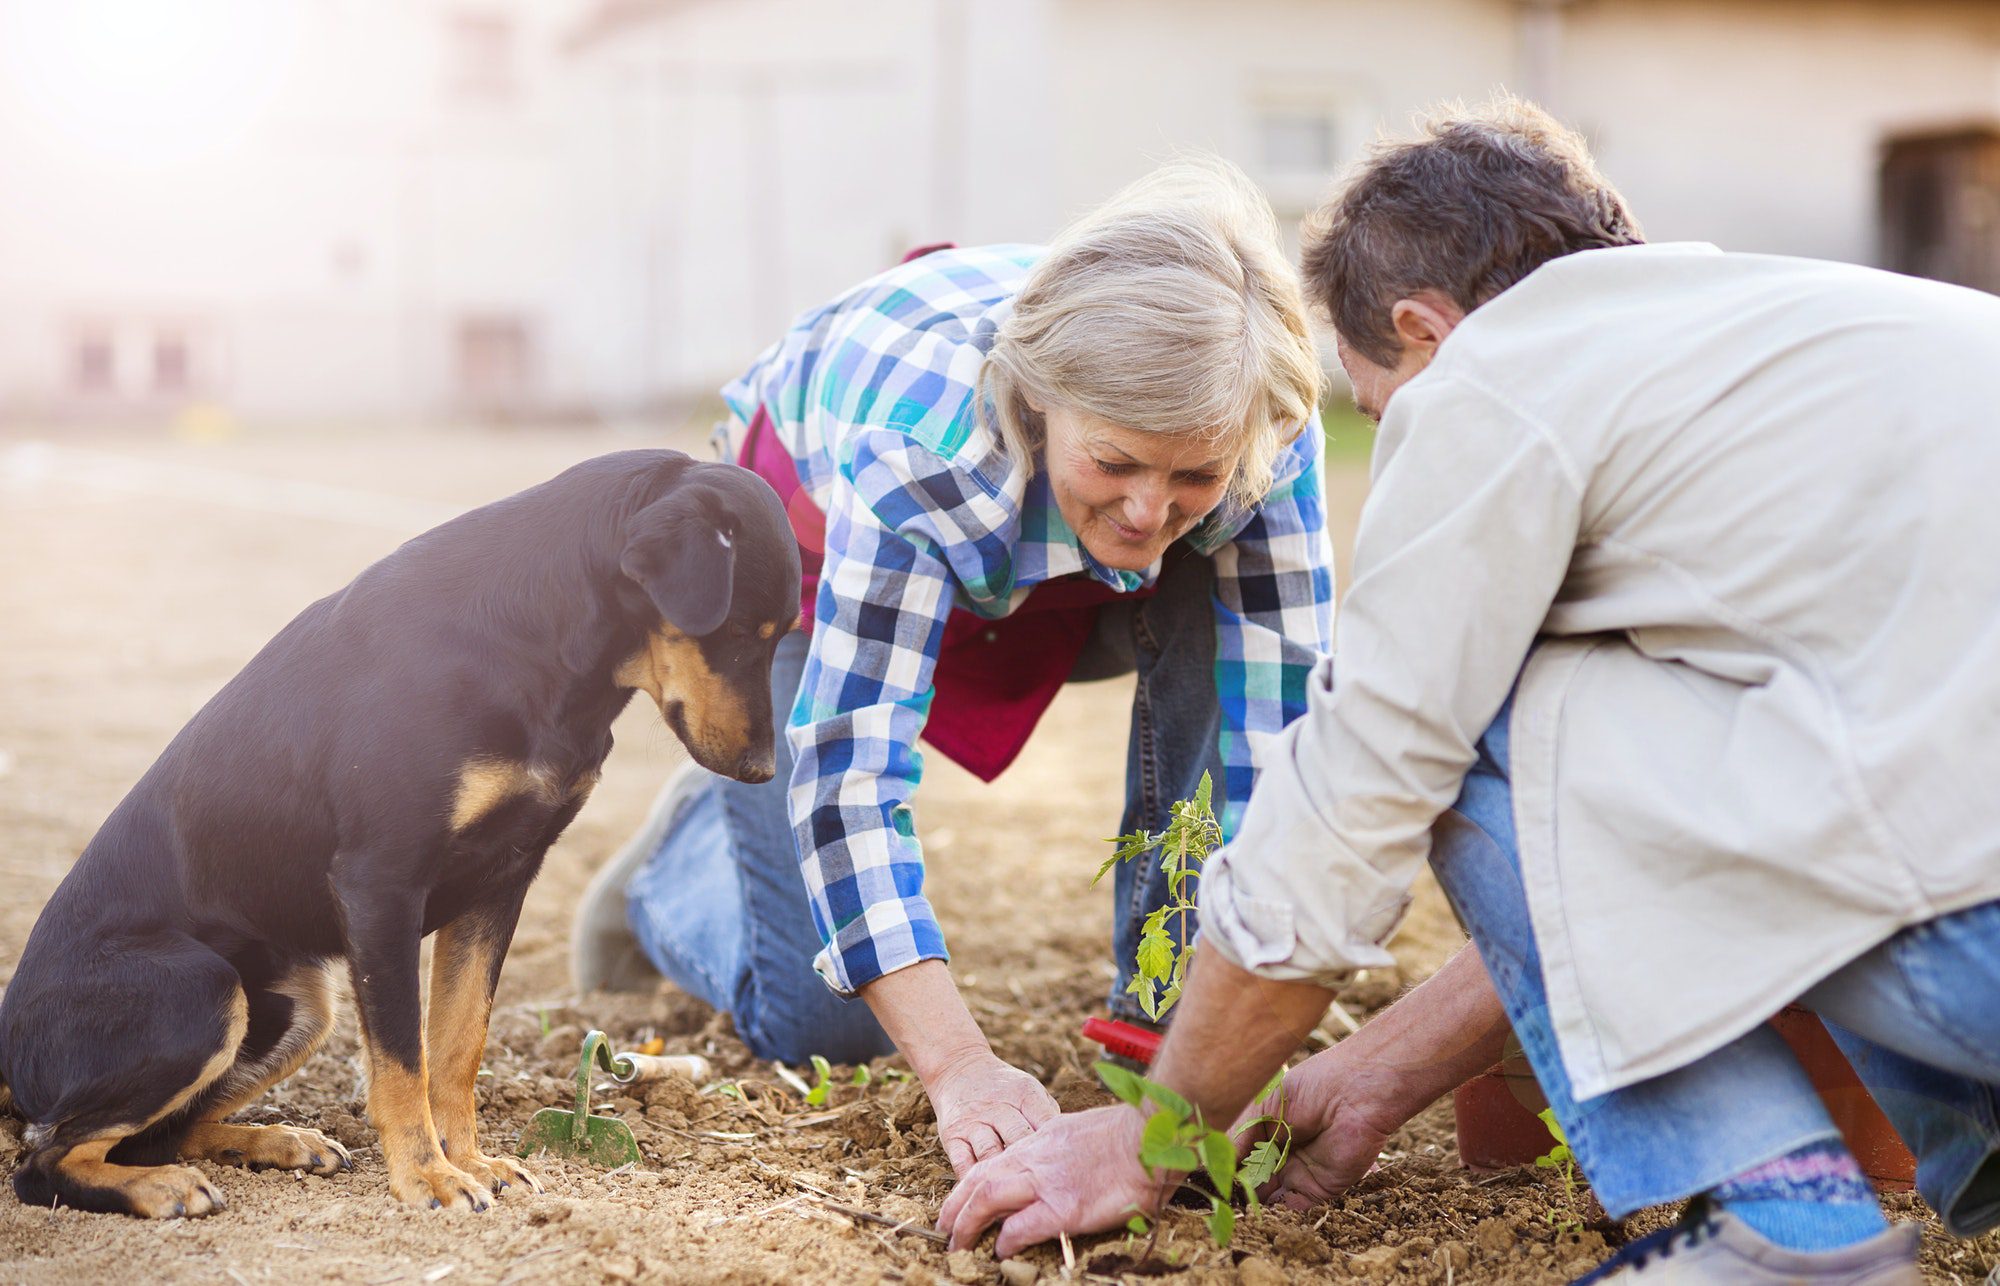 Seniors working in their home garden in Texas as their dog watches and they discuss Medicare eligibility.